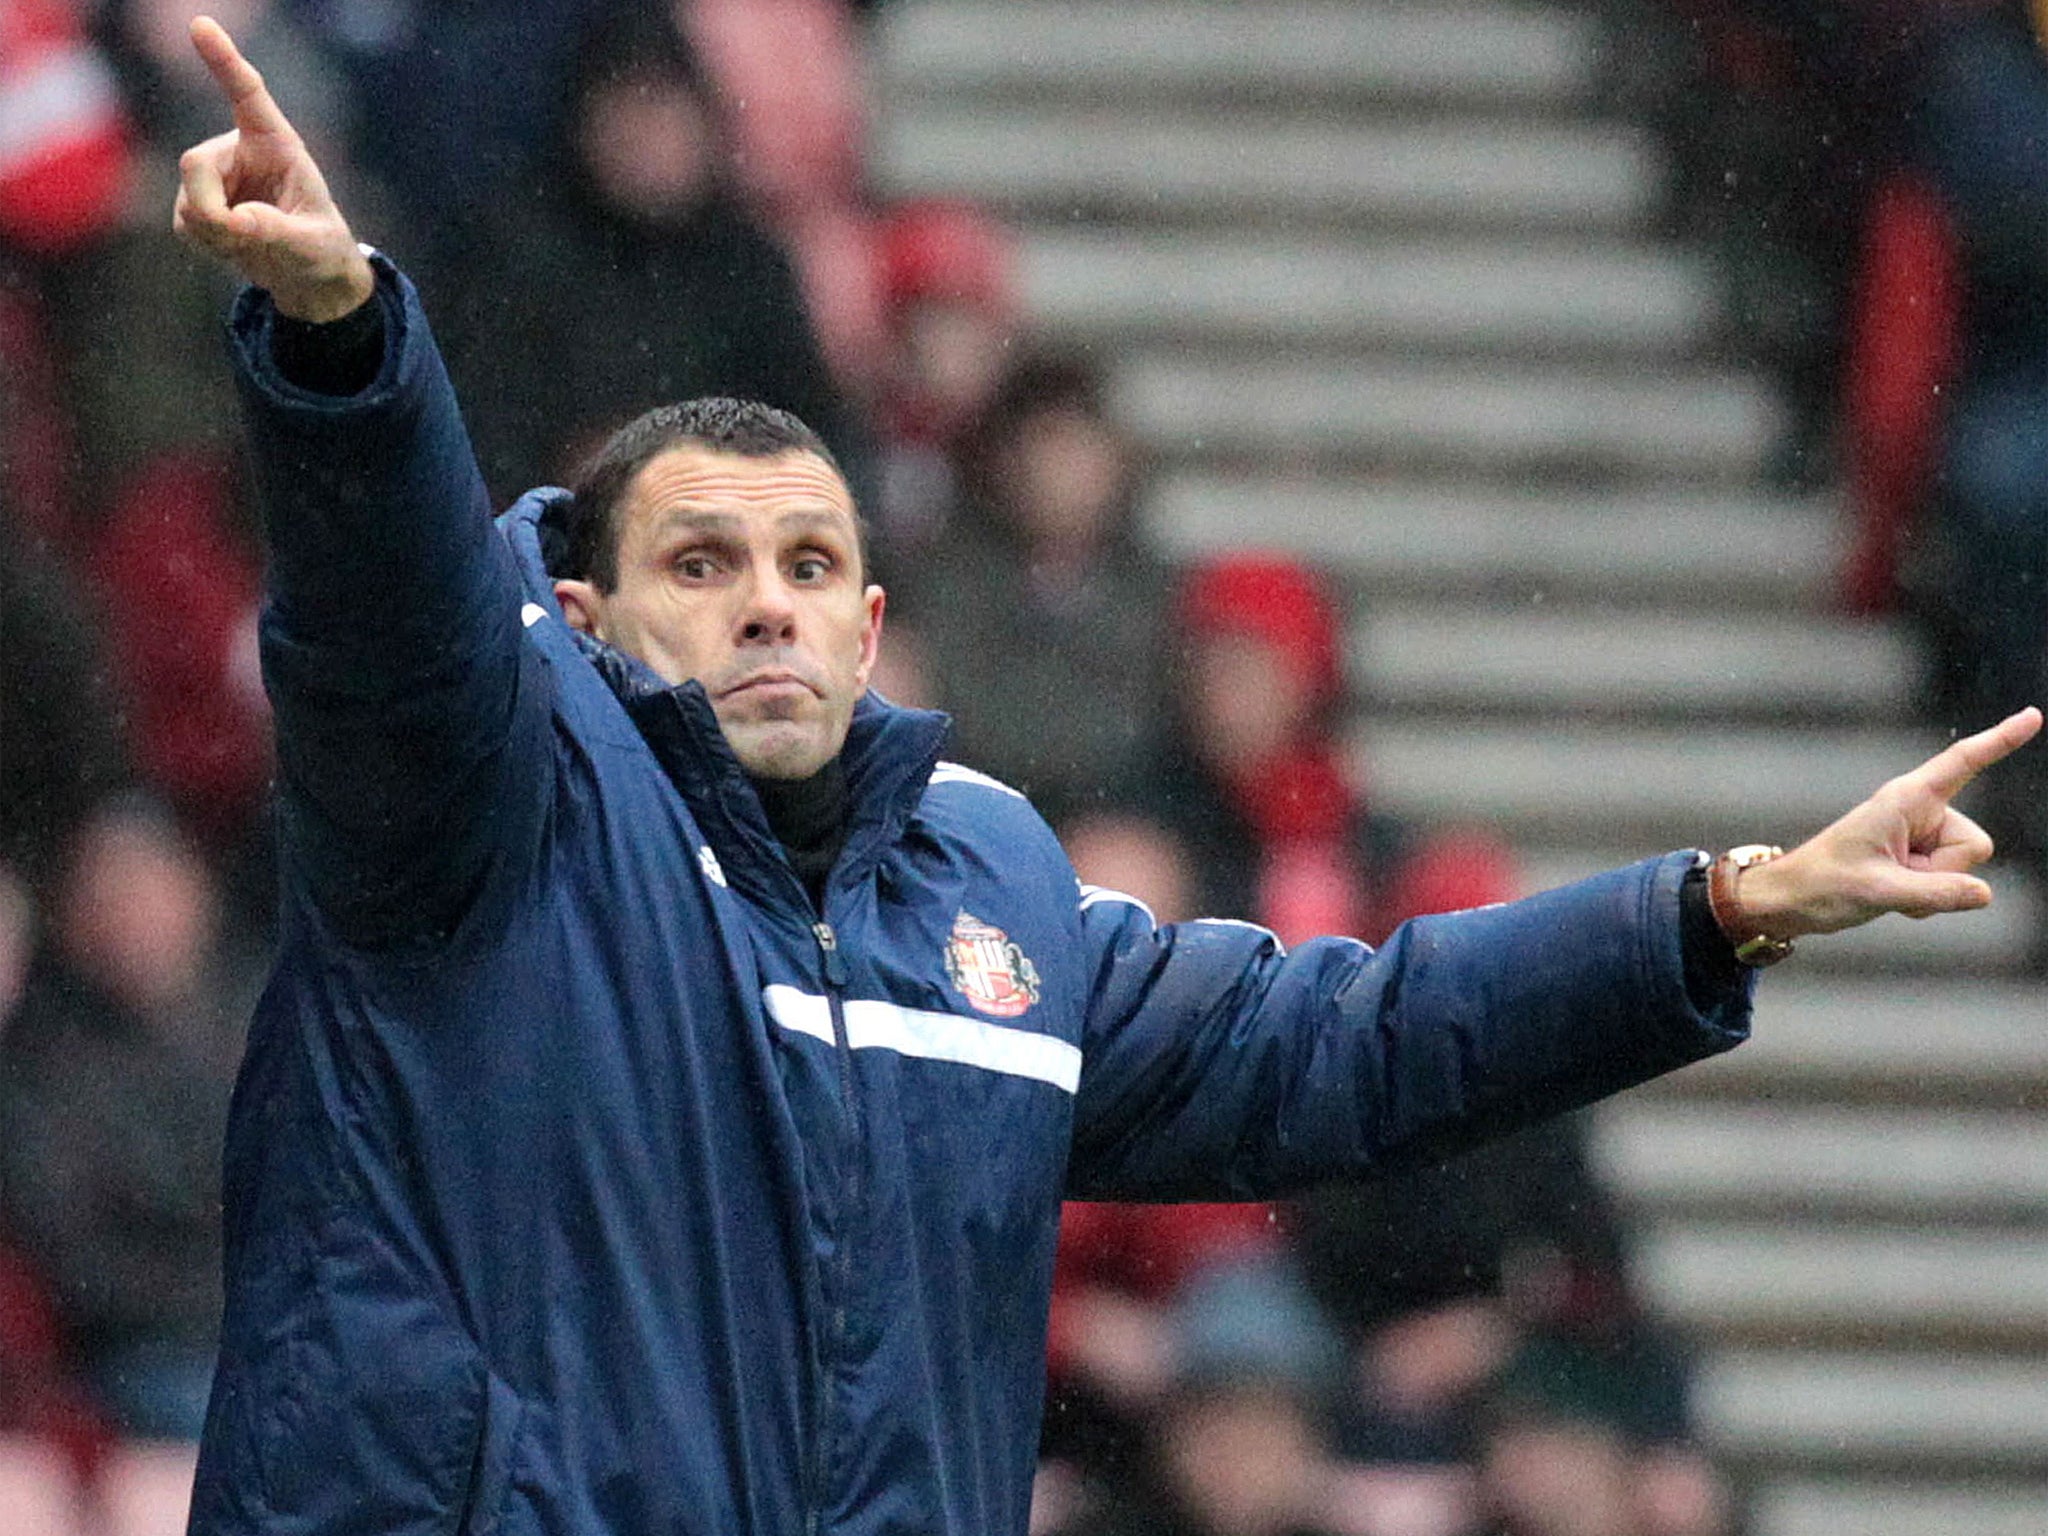 Gus Poyet gestures during the 2-2 draw with Southampton